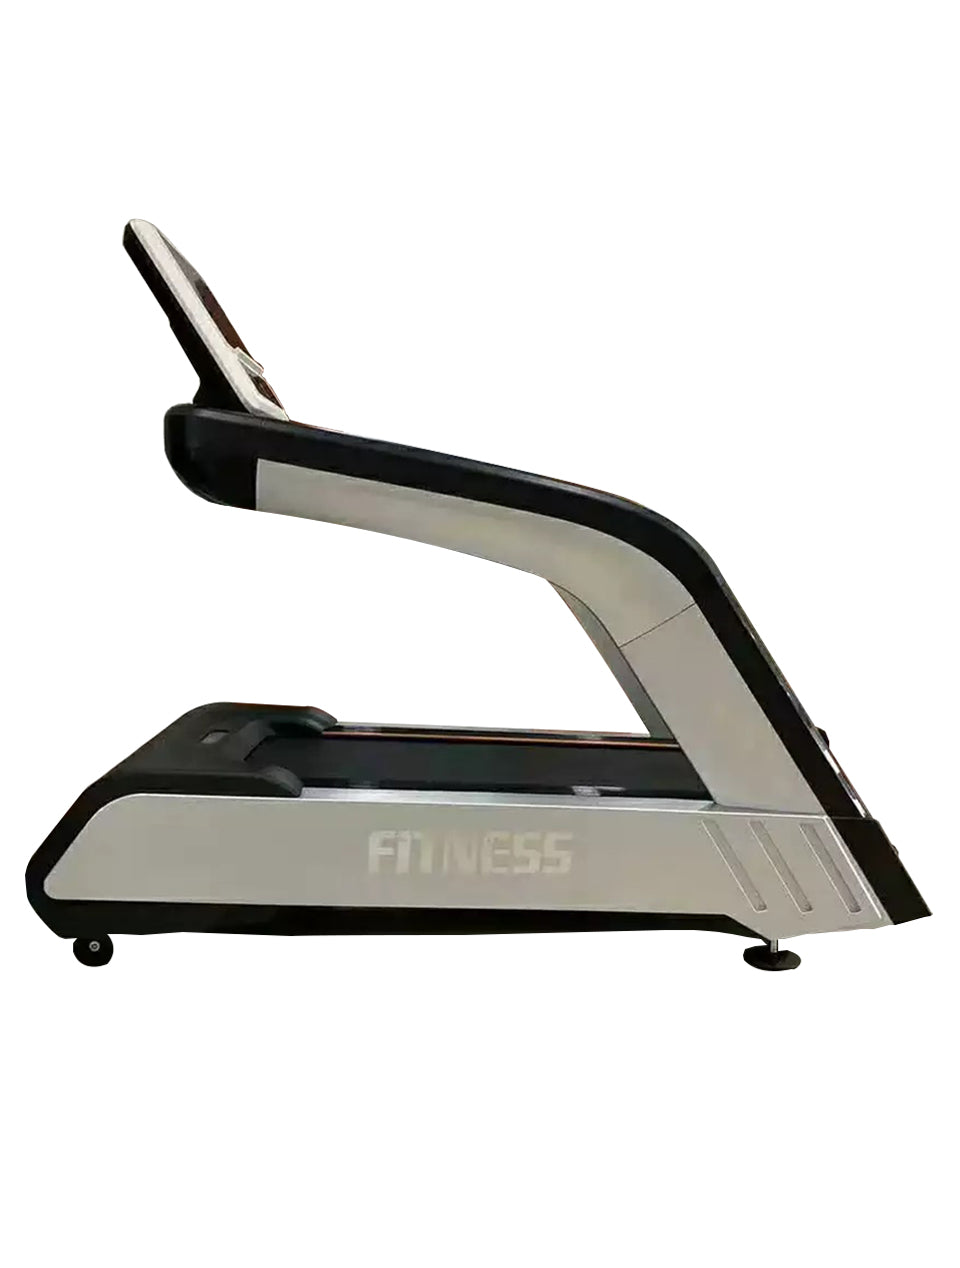 Commercial Treadmill-capable of supporting users weighing up to 180 kg.